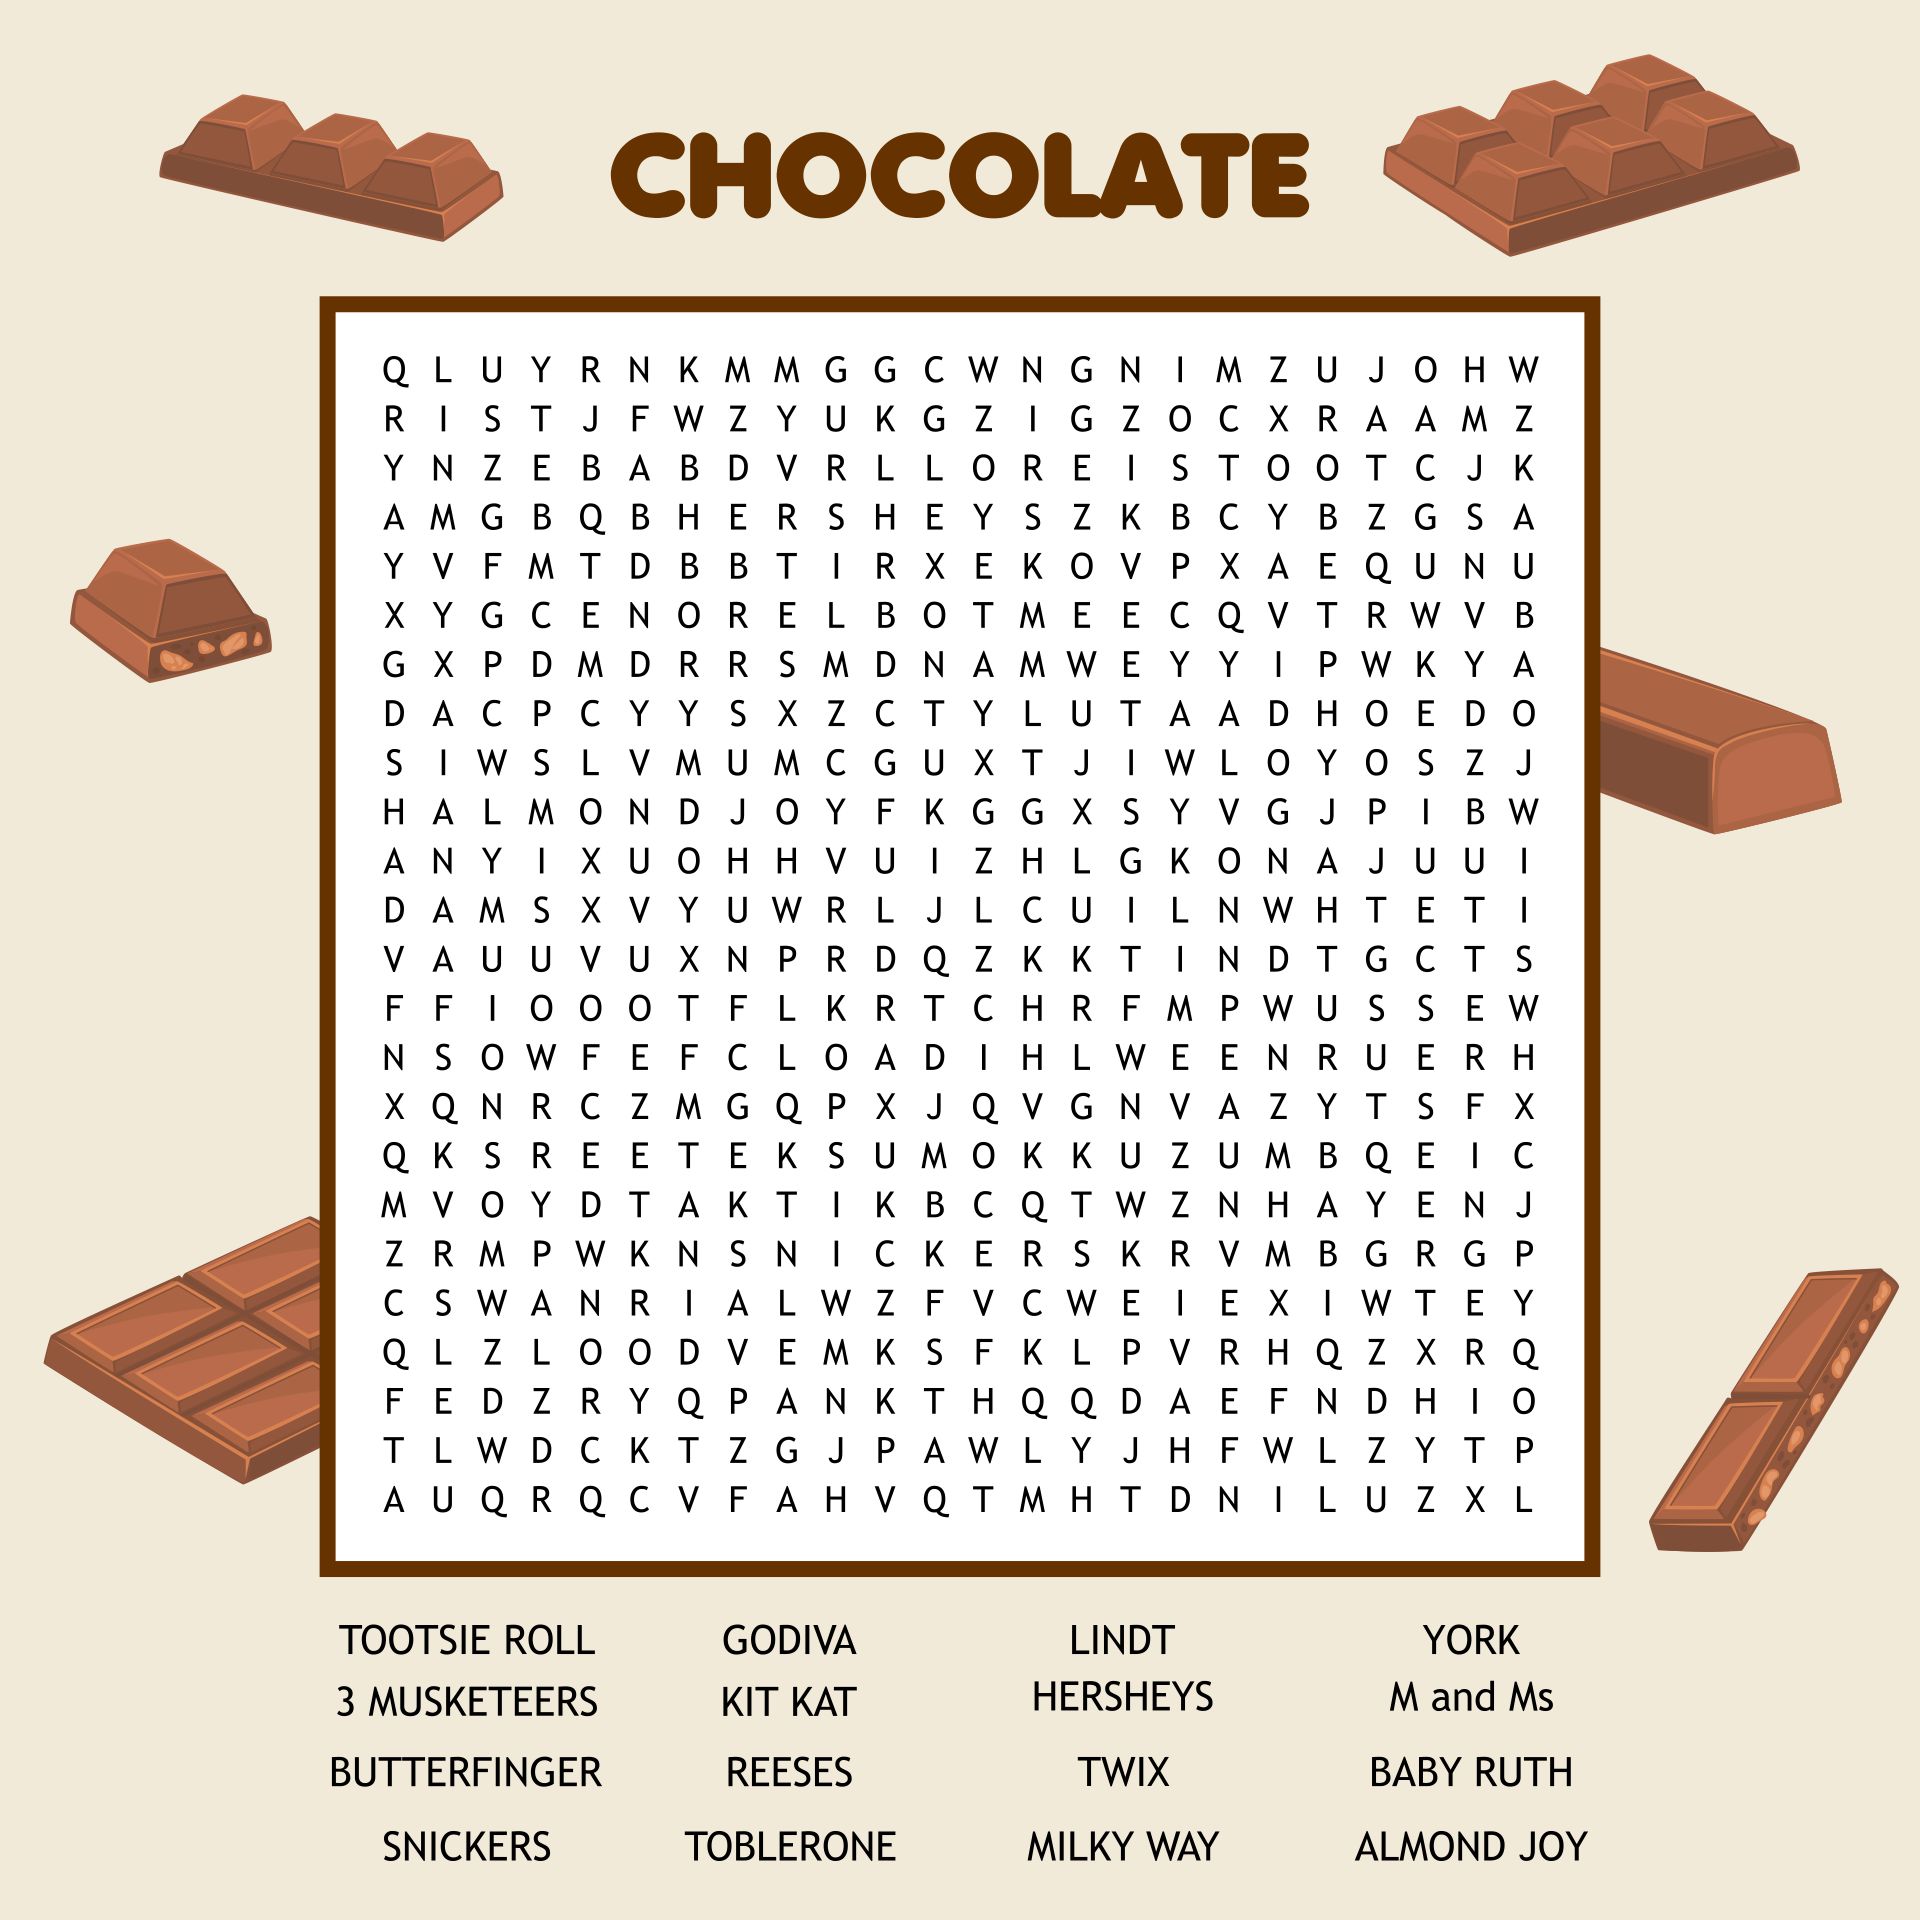 9 Best Images of Wellness Word Search Puzzle Printable Healthy Eating